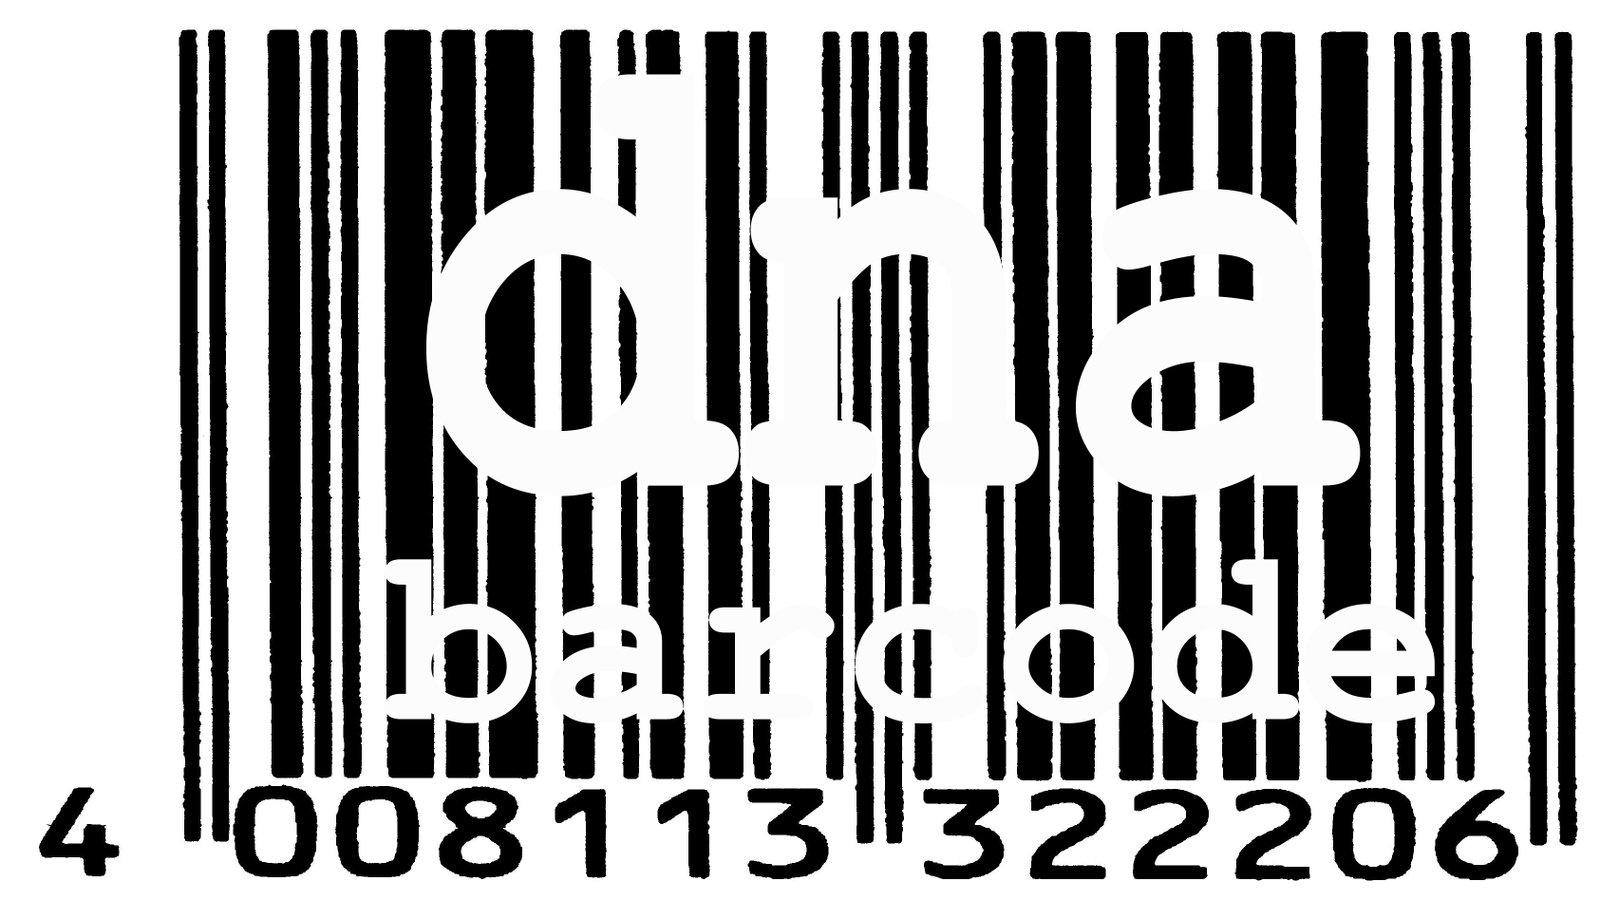 DNA barcodes to aid in anti-counterfeiting